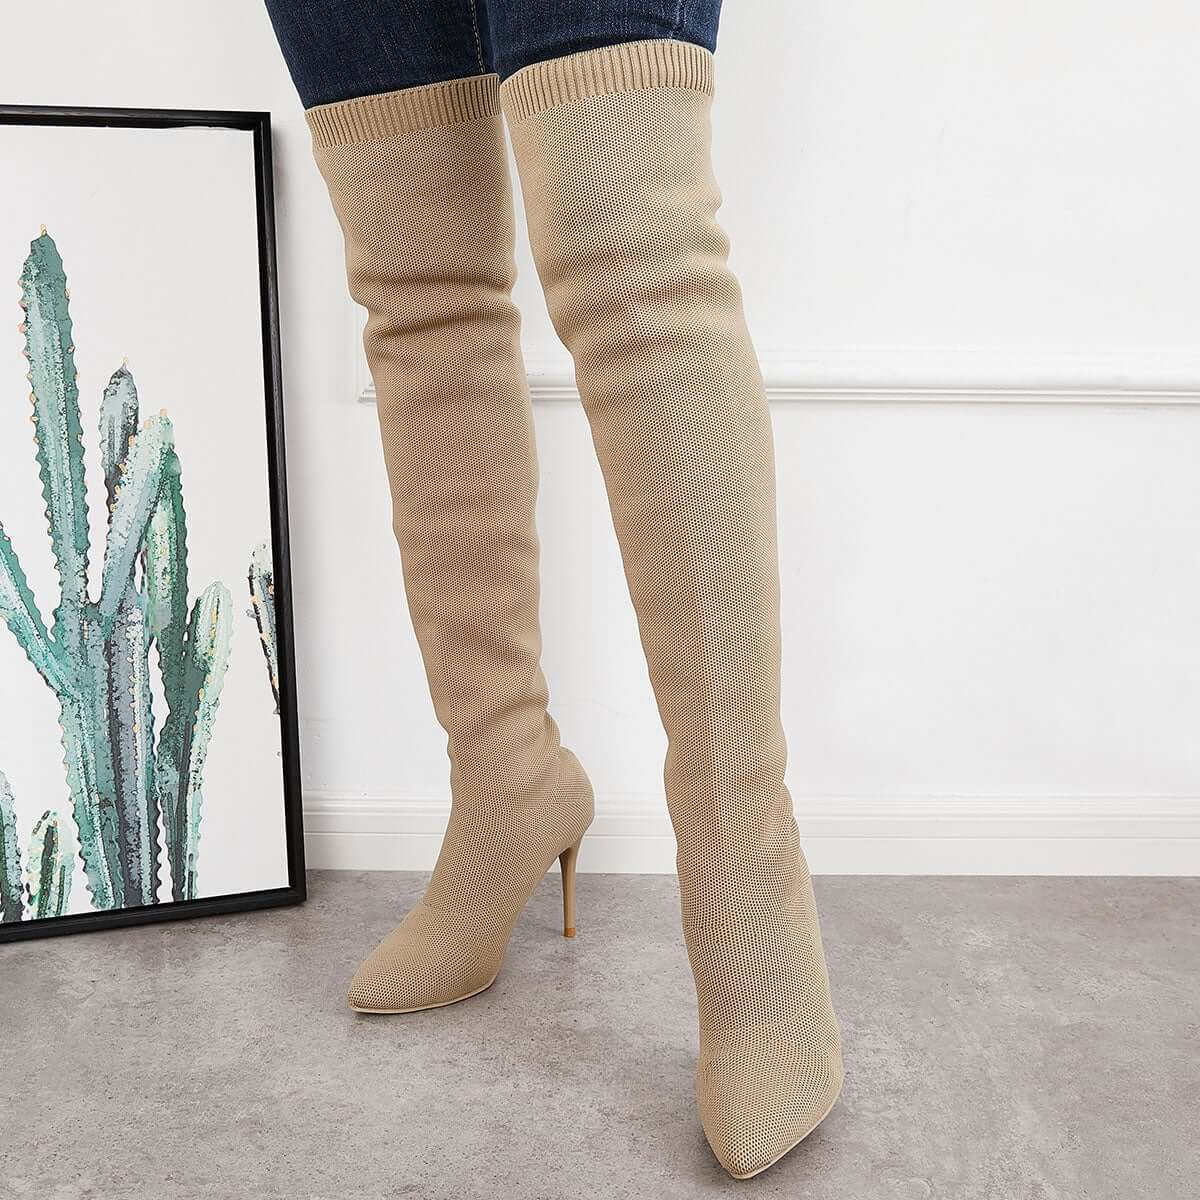 Thigh High Stiletto Heel Stretchy Knit Boots Pull on Over The Knee Boo ...